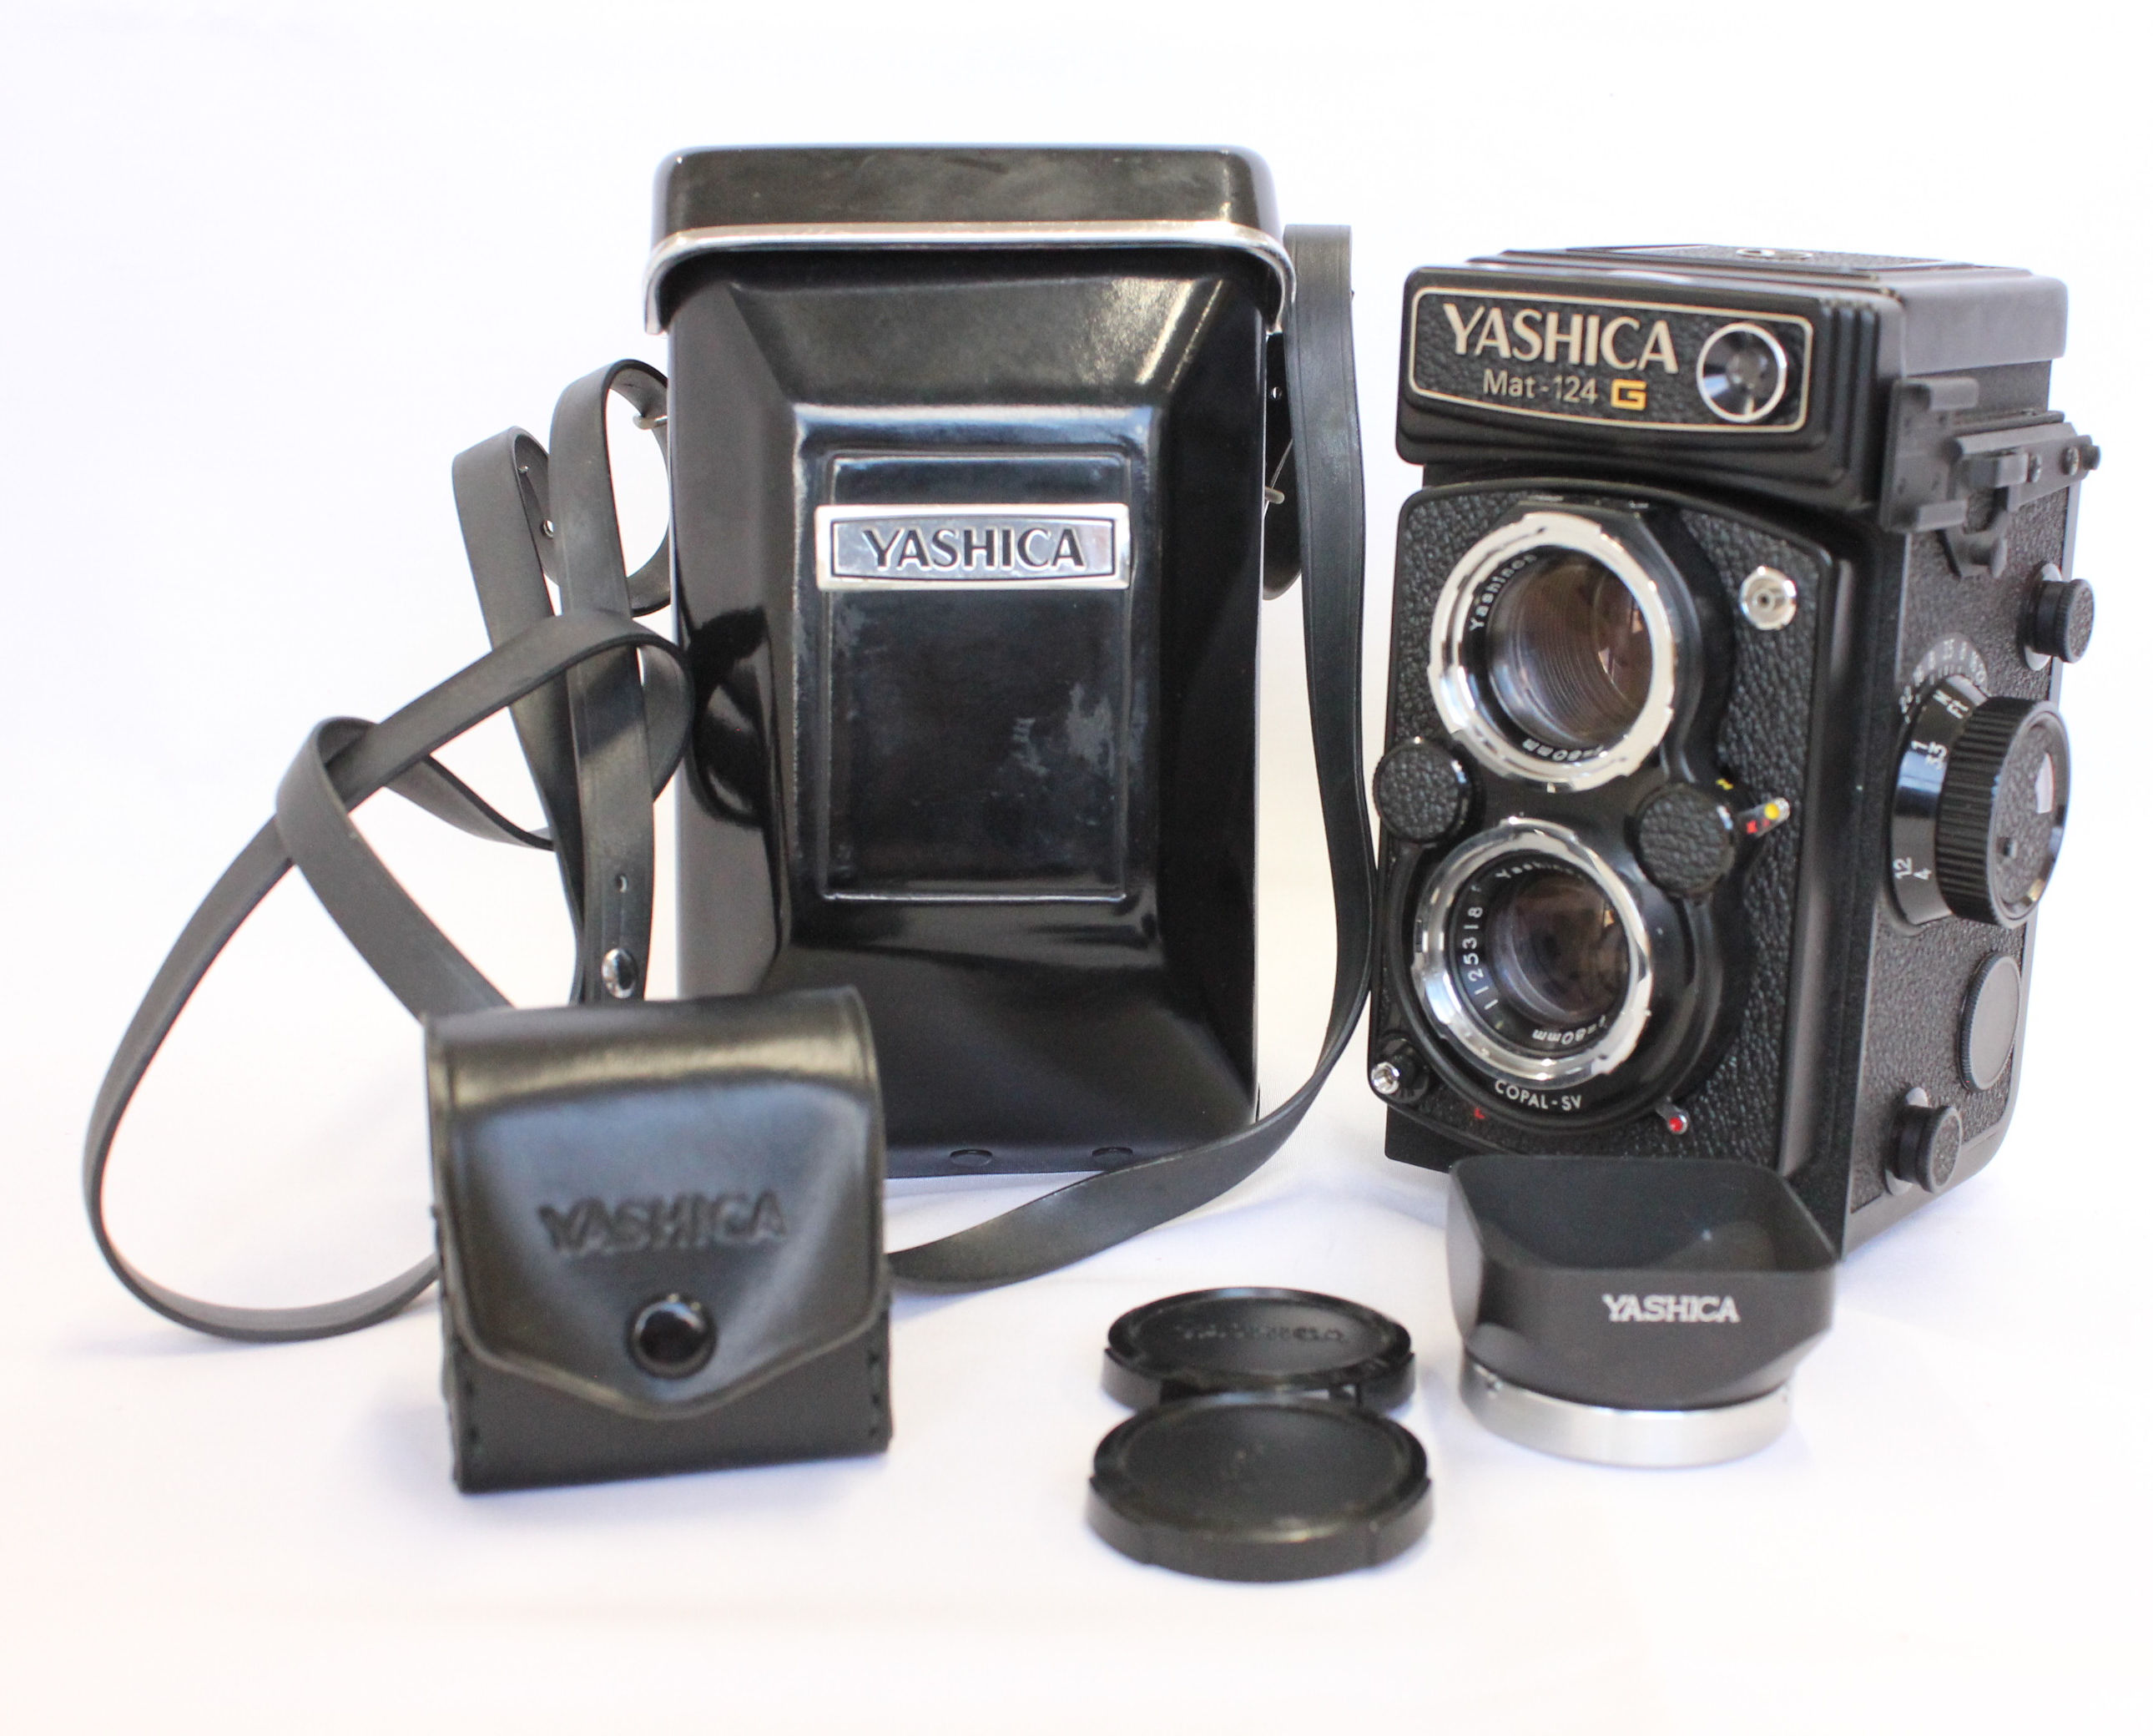 Japan Used Camera Shop | [Top Mint] YASHICA MAT 124 G 6x6 TLR Medium Format Camera with 80mm F/3.5 Lens from Japan